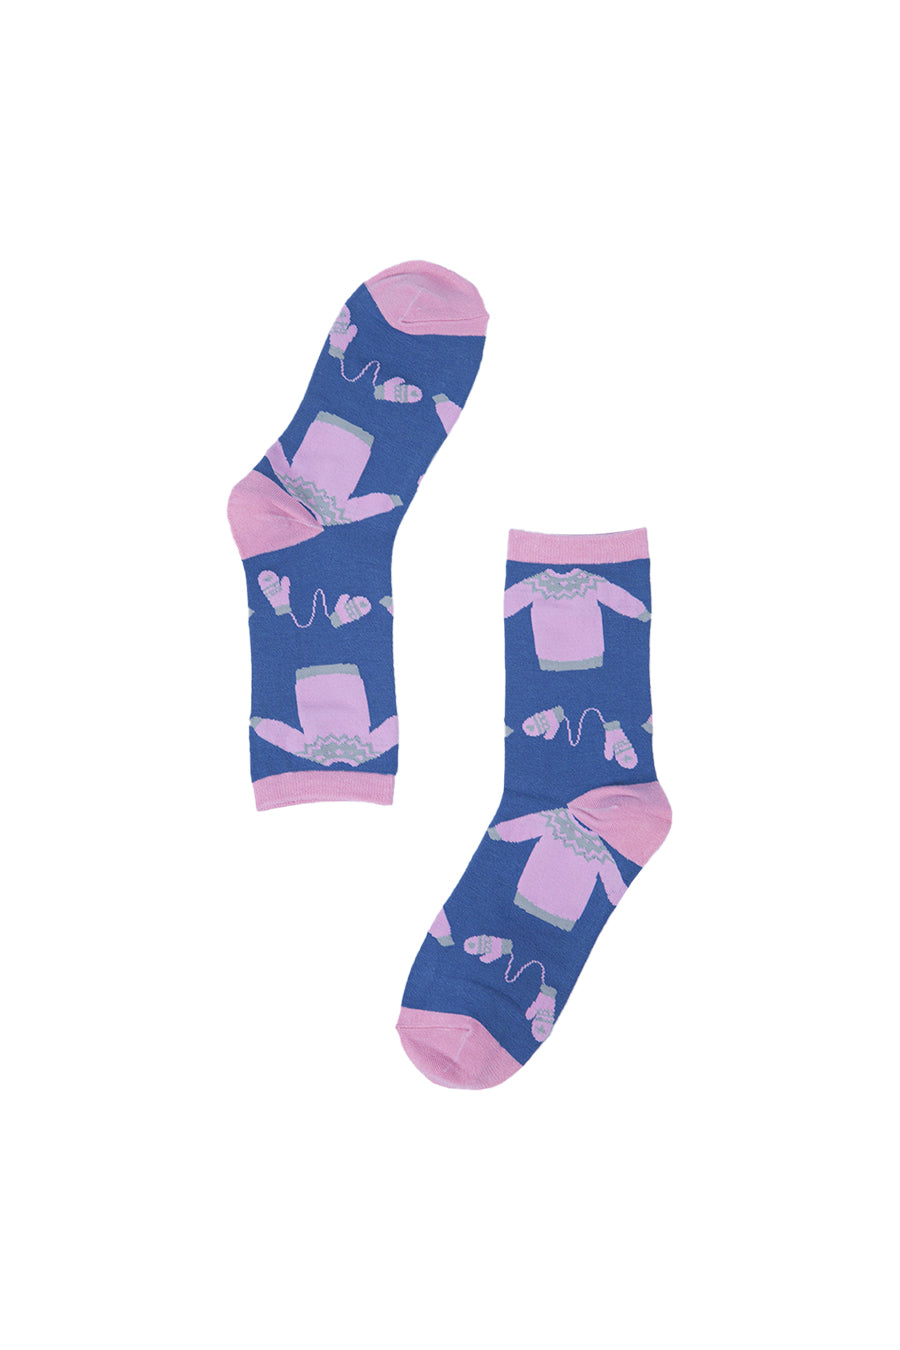 blue, pink ankle socks with xmas jumpers and hats